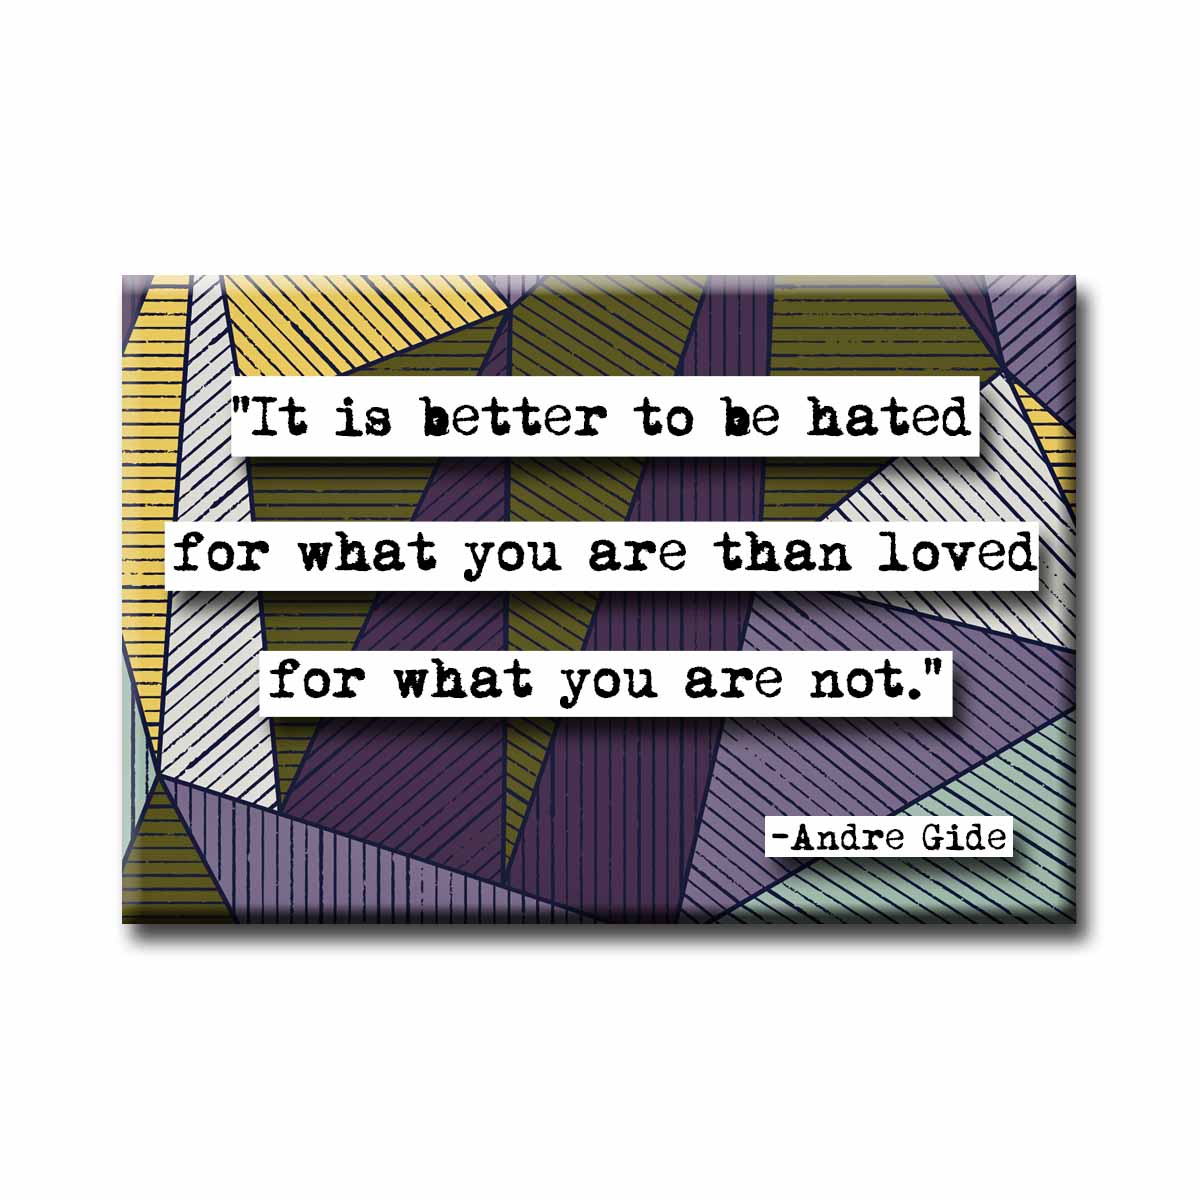 Andre Gide  Quote Refrigerator Magnet (no.318)